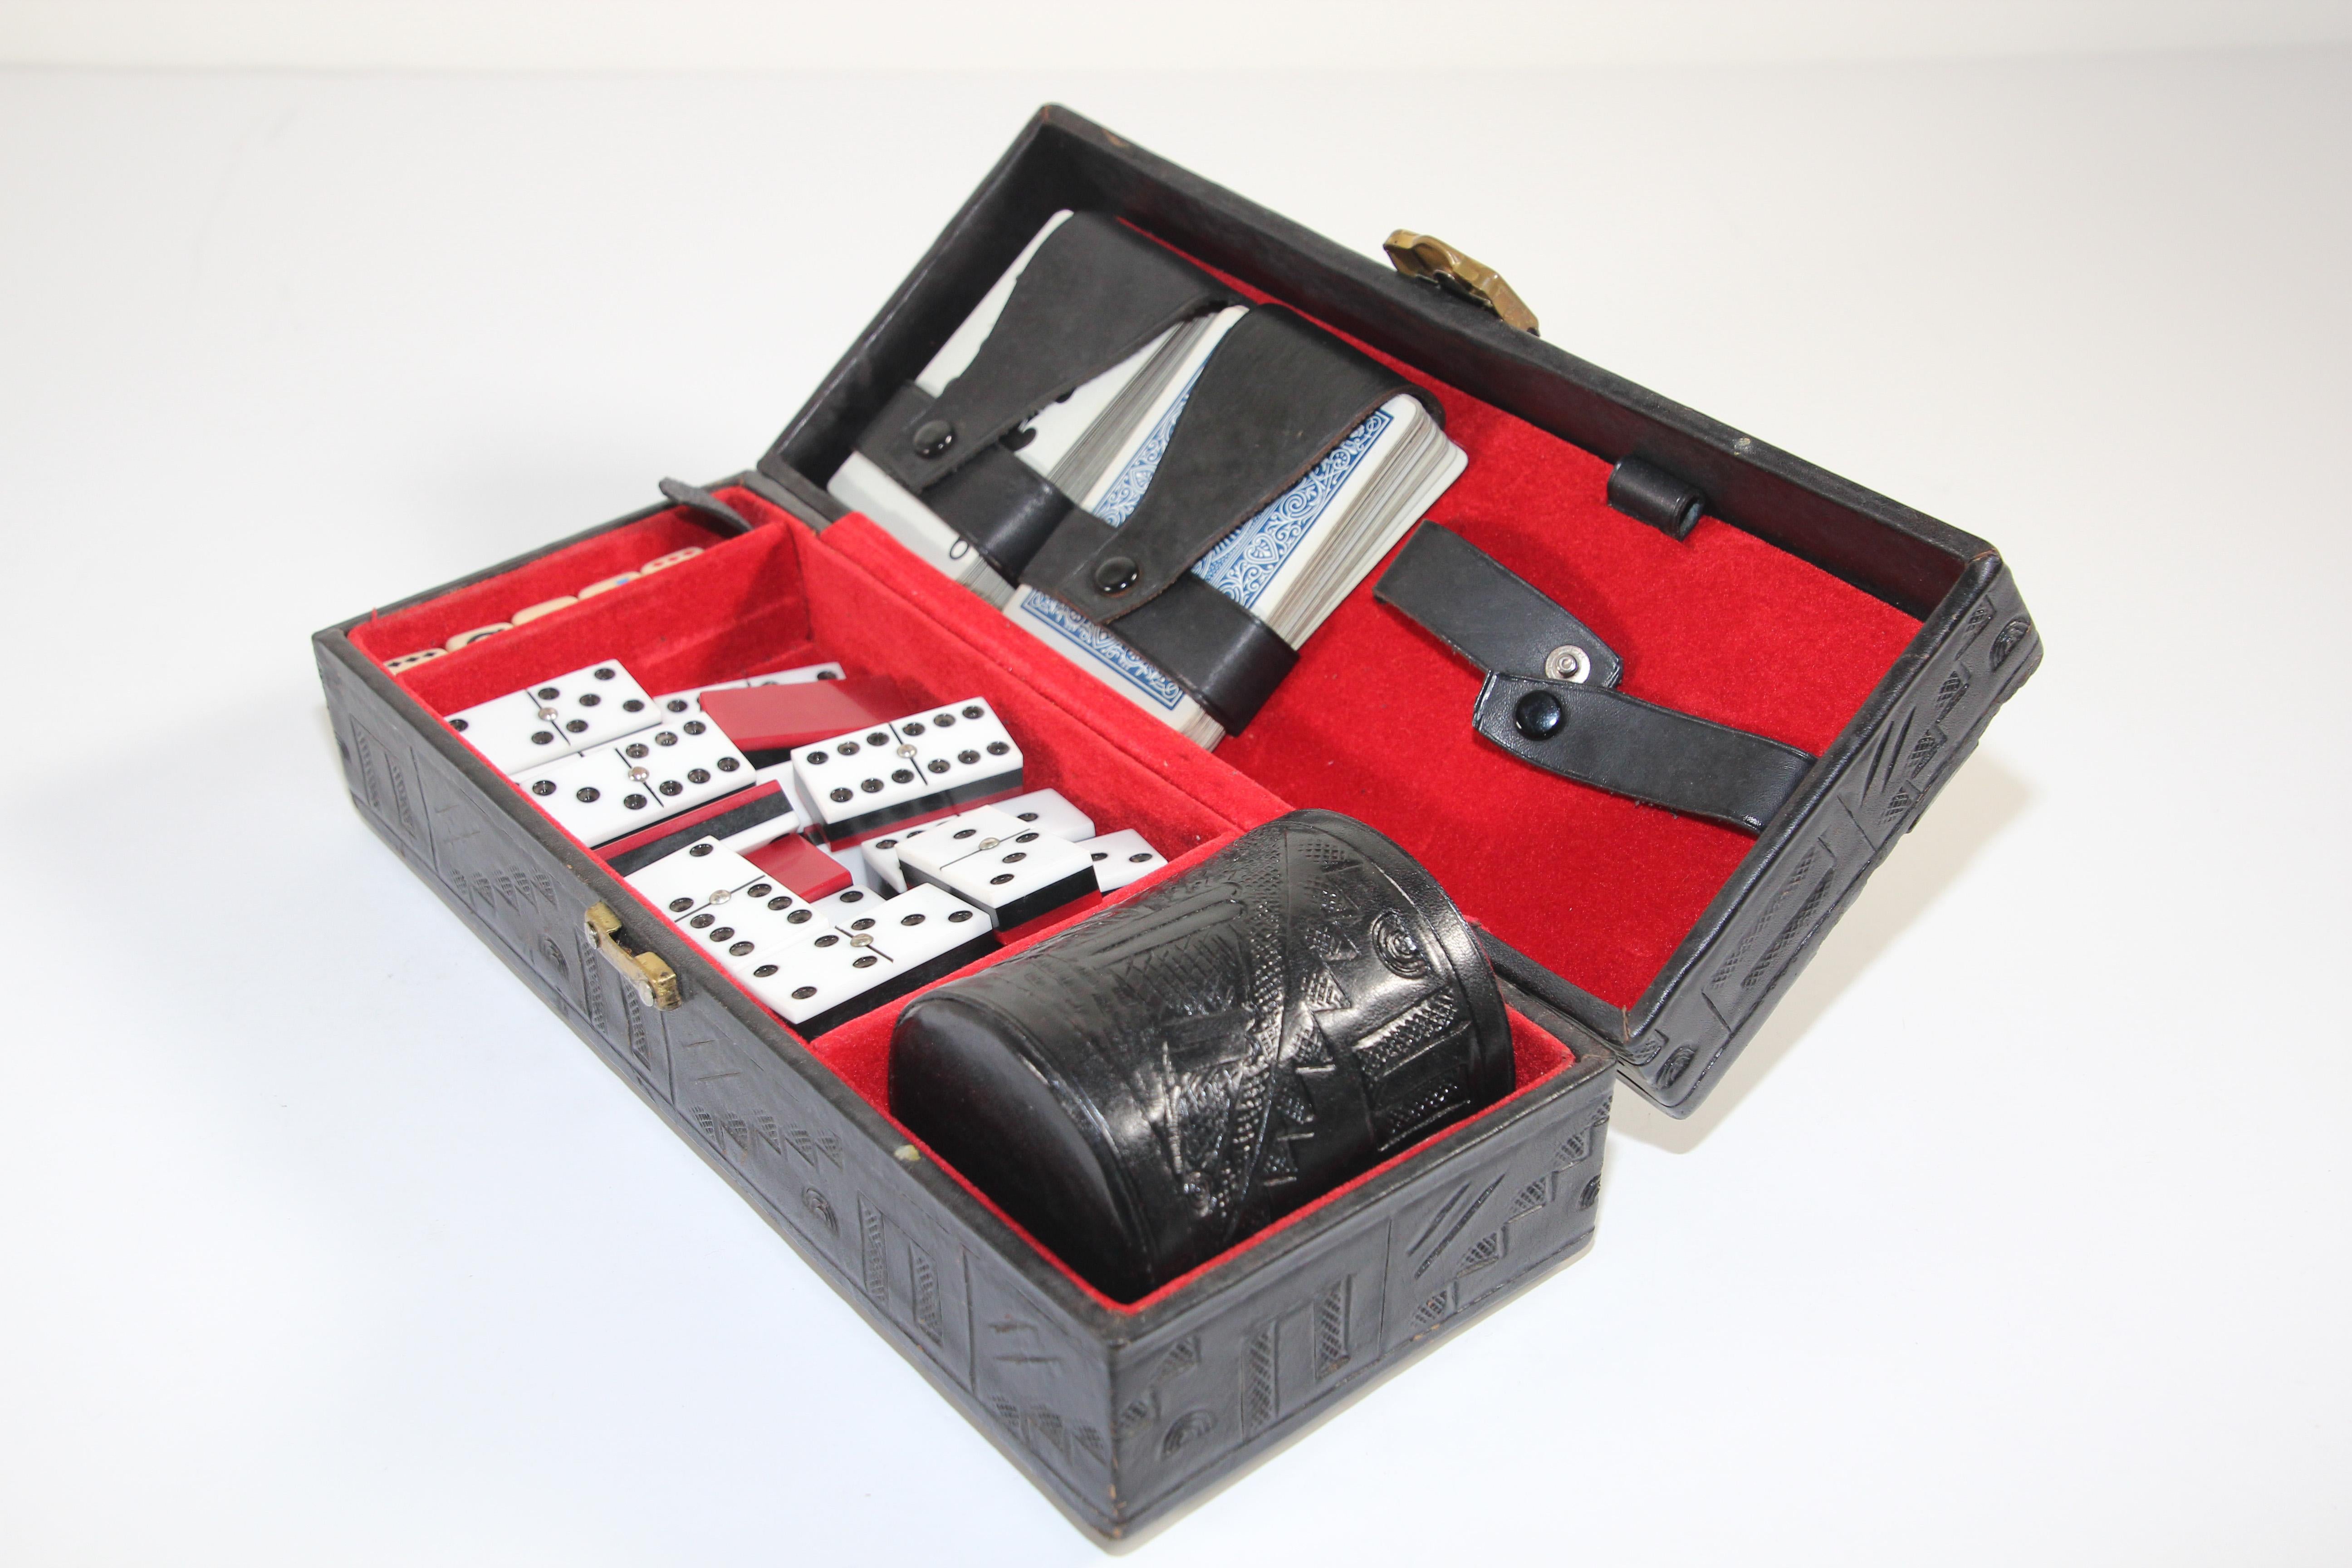 Mexican hand tooled embossed leather case with leather cup. 5- Four sided Dice. 2-Decks of cards.
28 black, red and white dominoes with metal pin in center to avoid scratches when playing or shuffling. Dominoes.
Mexican tooled leather case 